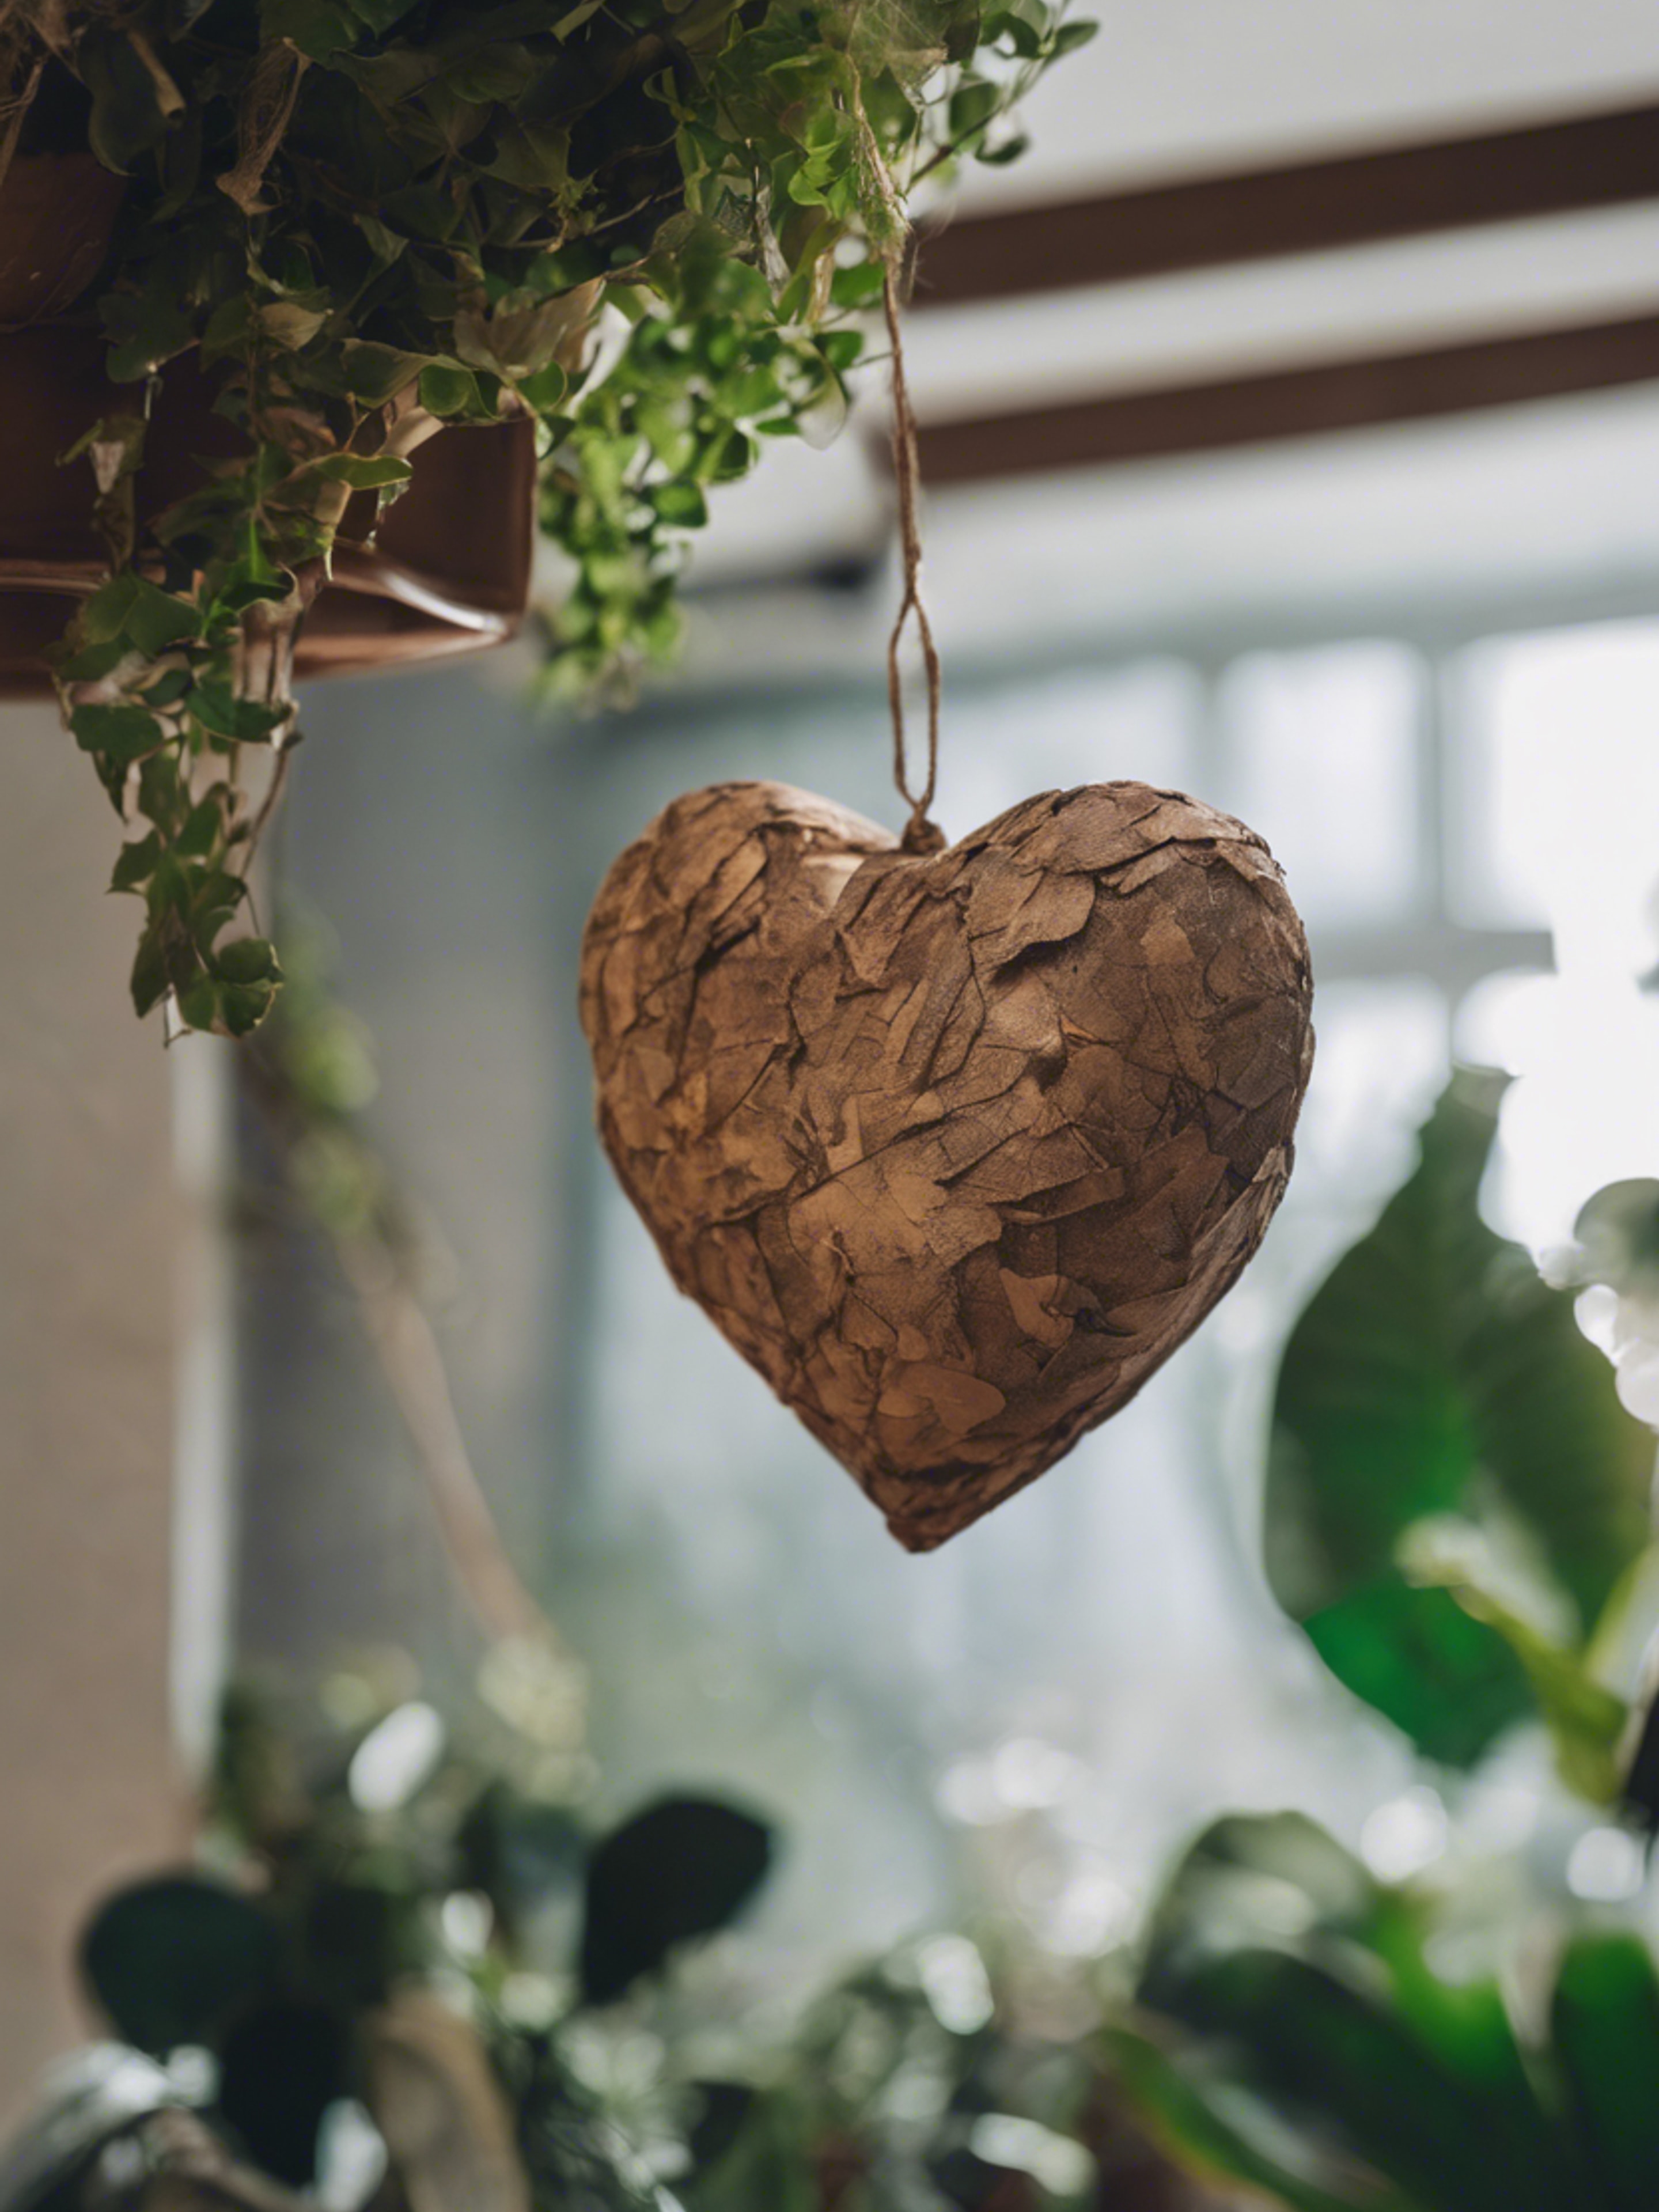 A handmade brown, paper mache heart hanging from an indoor plant.壁紙[794ac324fb5c46d0b206]